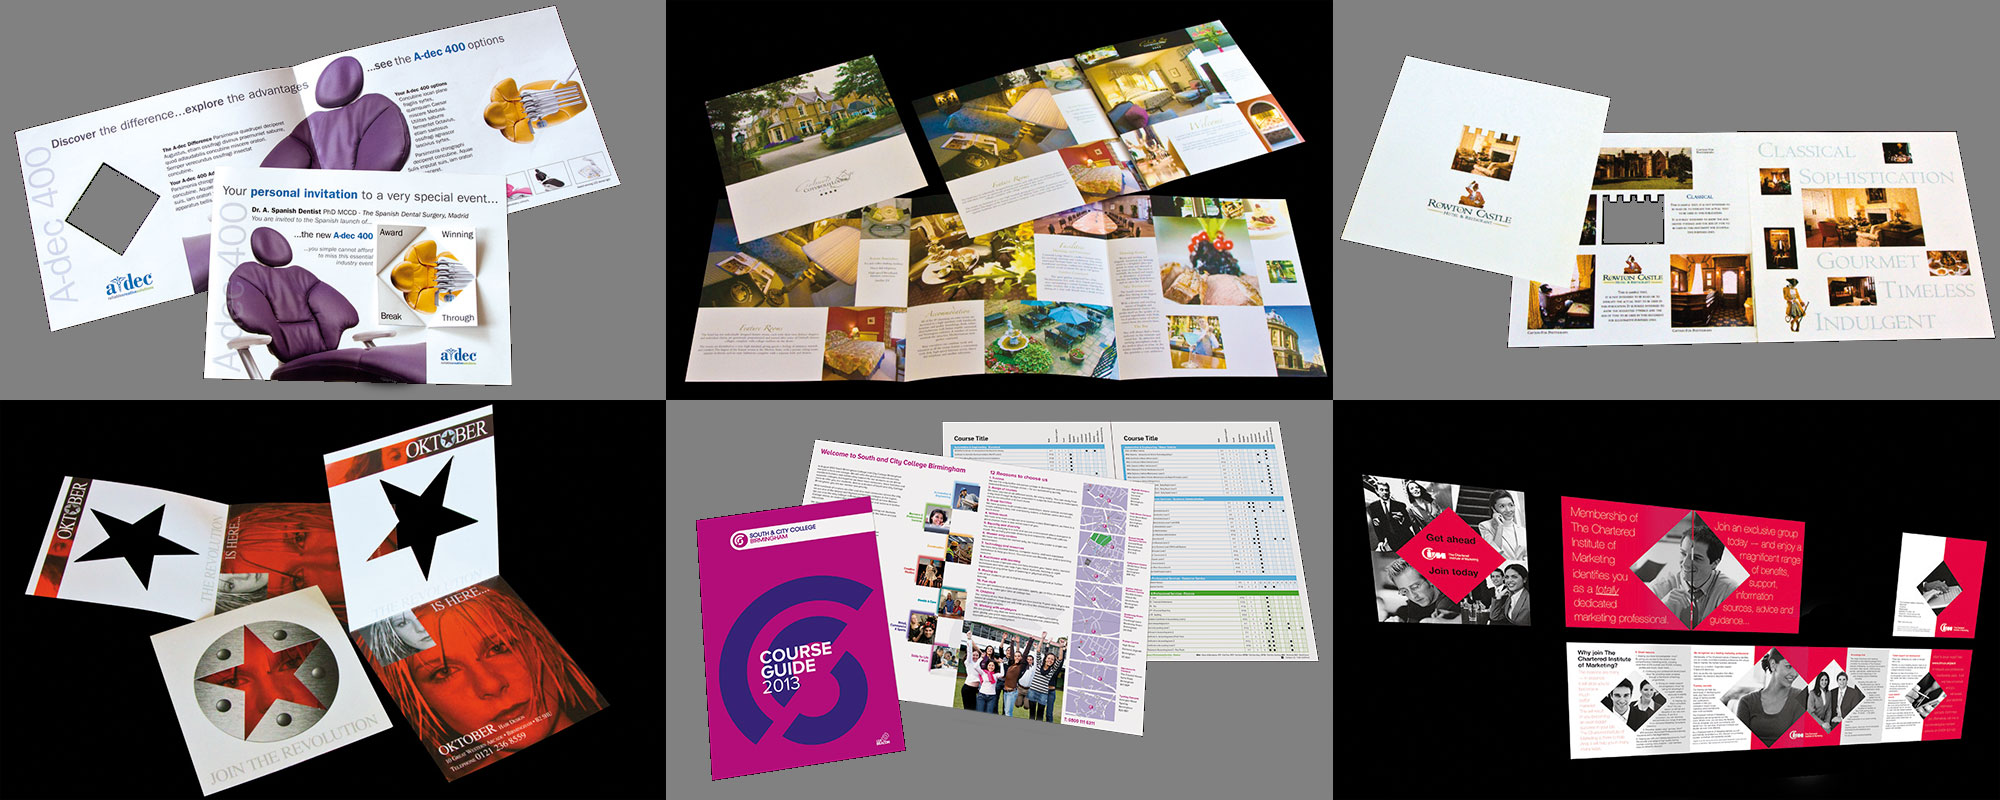 A selection of leaflets and brochures designed by Richard Blunt & Associates, specialist in design for print - experienced, creative, independent, autonomous, freelance graphic design consultancy in Hall Green, Birmingham, West Midlands © RichardBlunt-design.co.uk